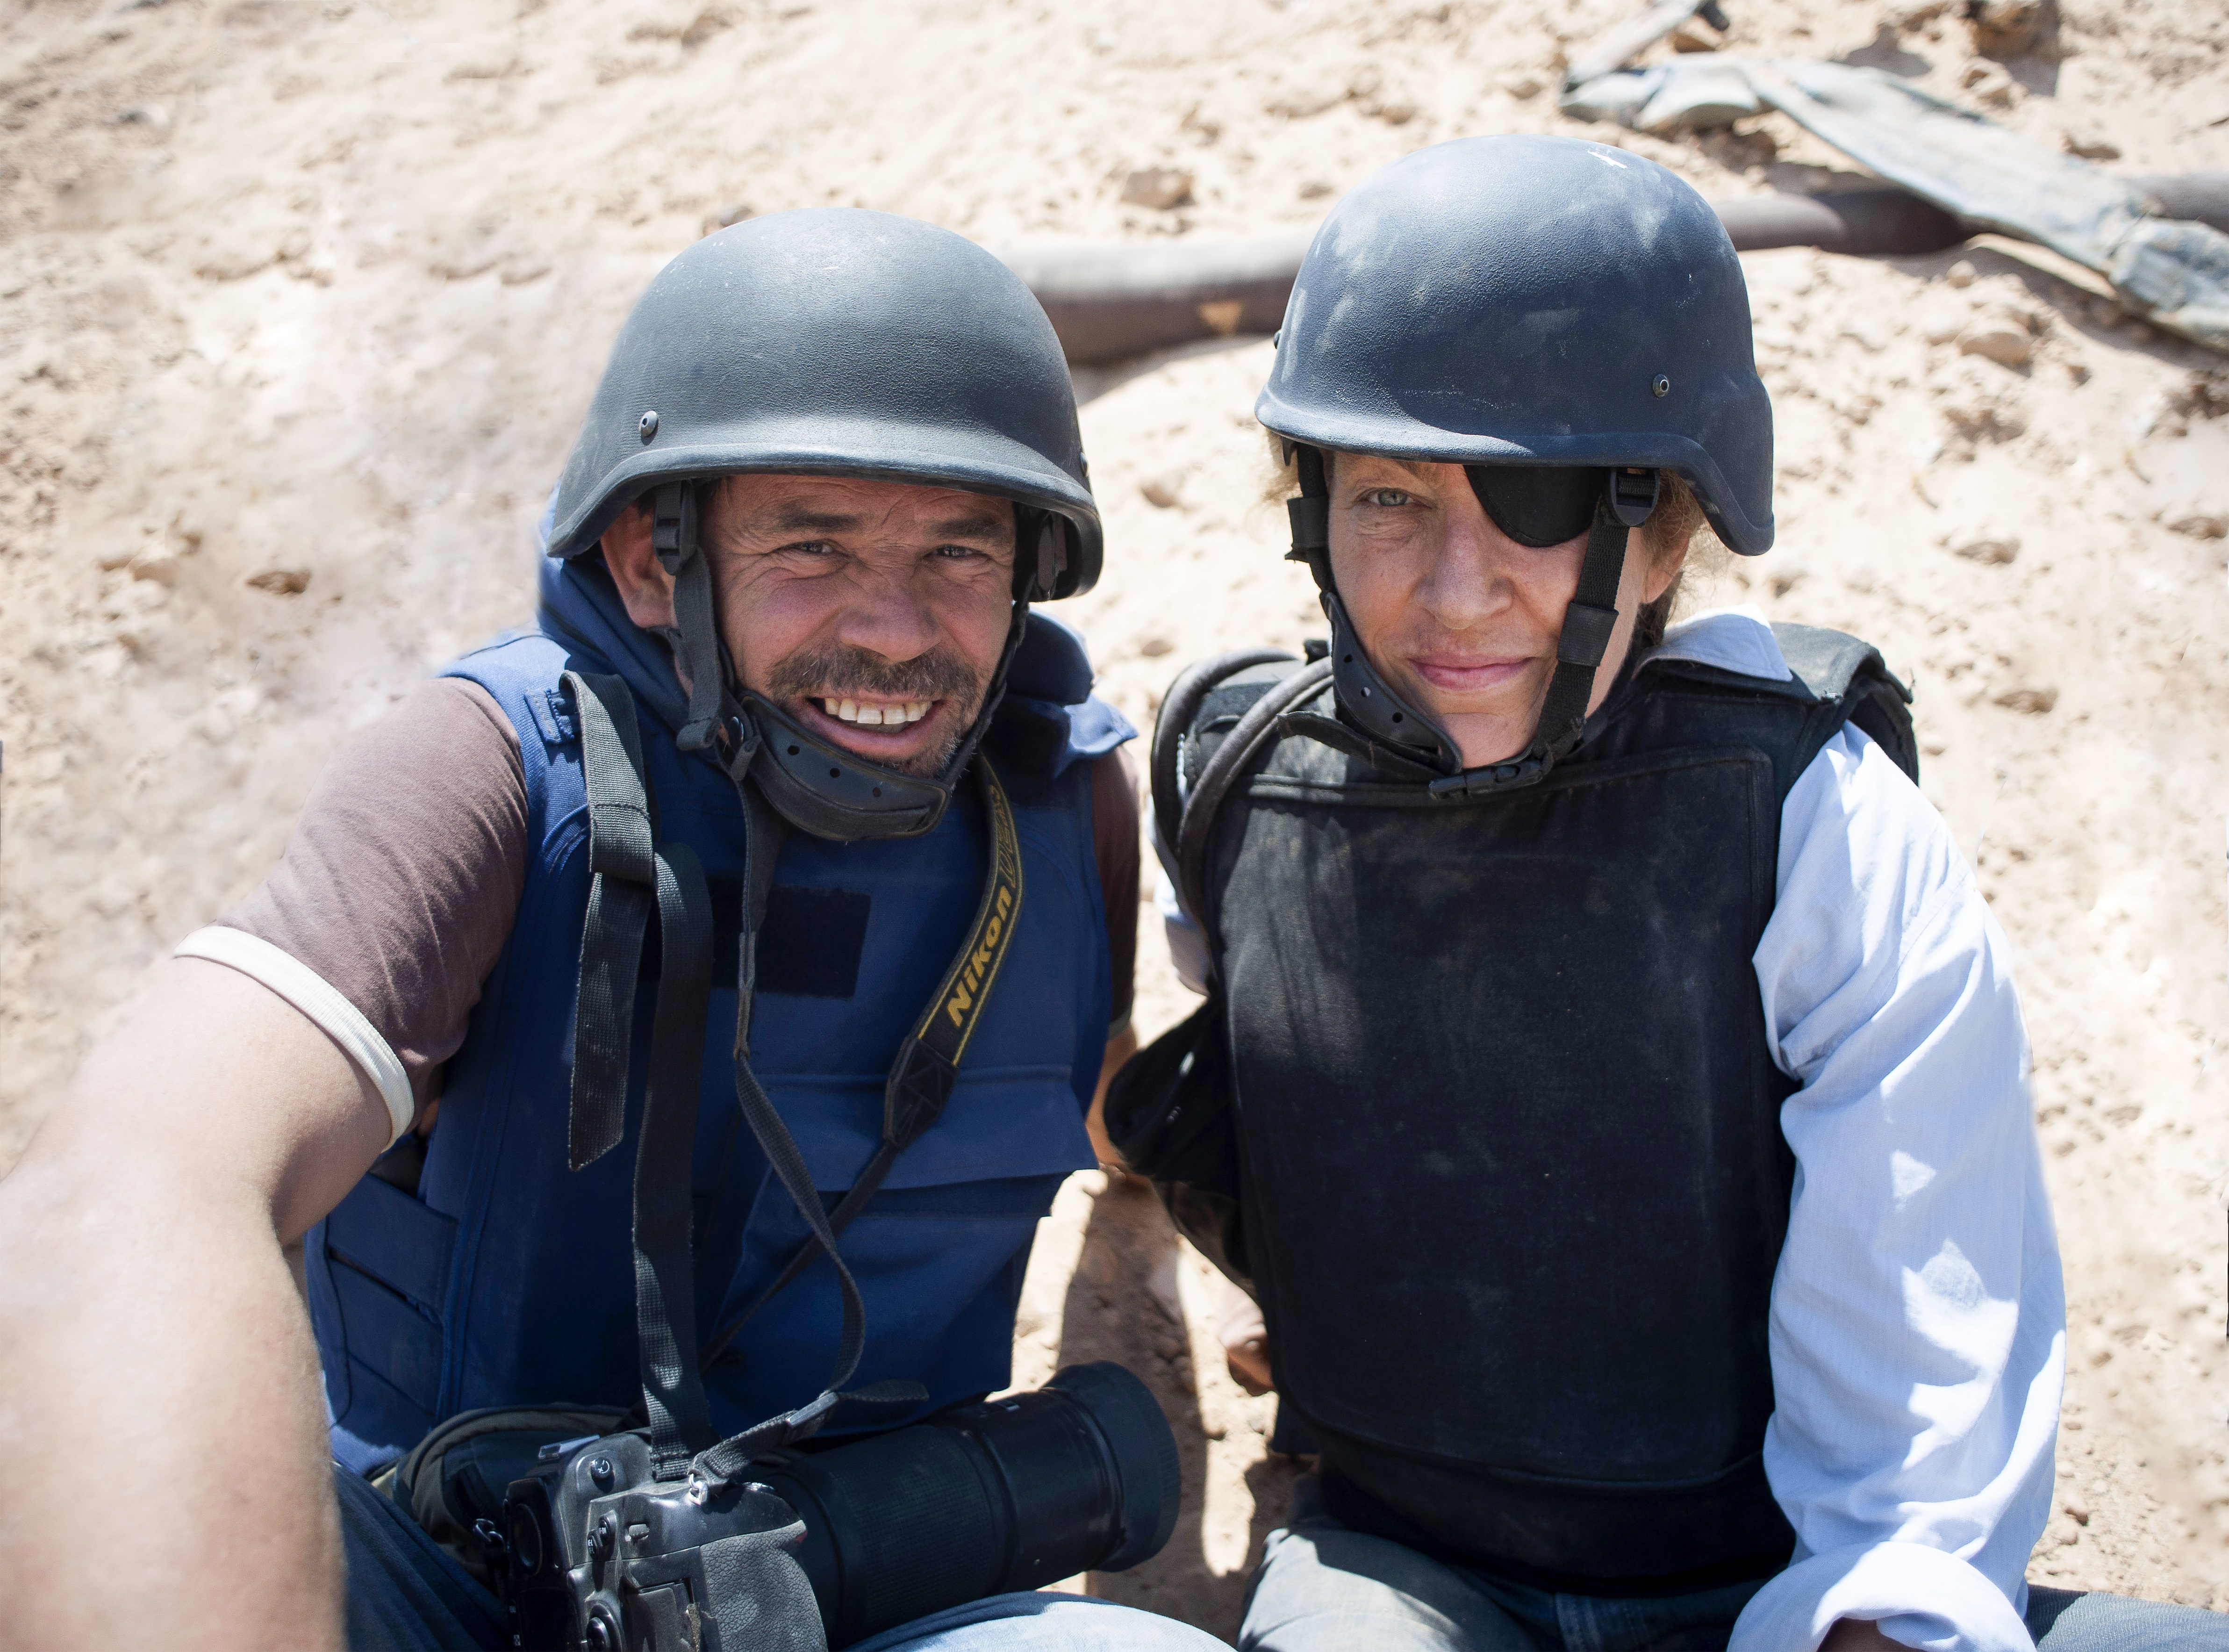 Paul Conroy and Marie Colvin in Misrata, Libya in a still from Under the Wire.